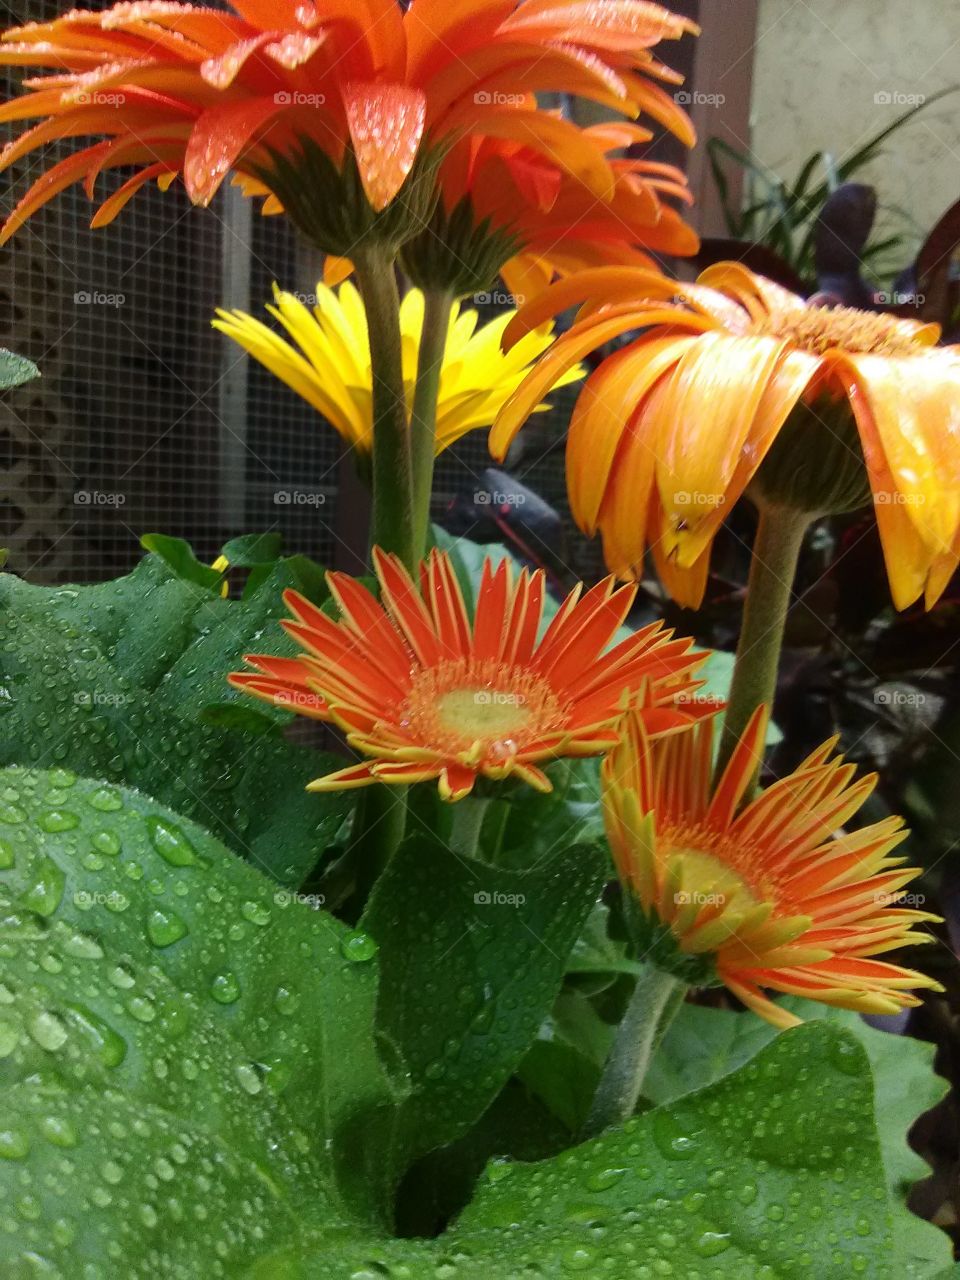 bunch of gerbera daisies with water droplets